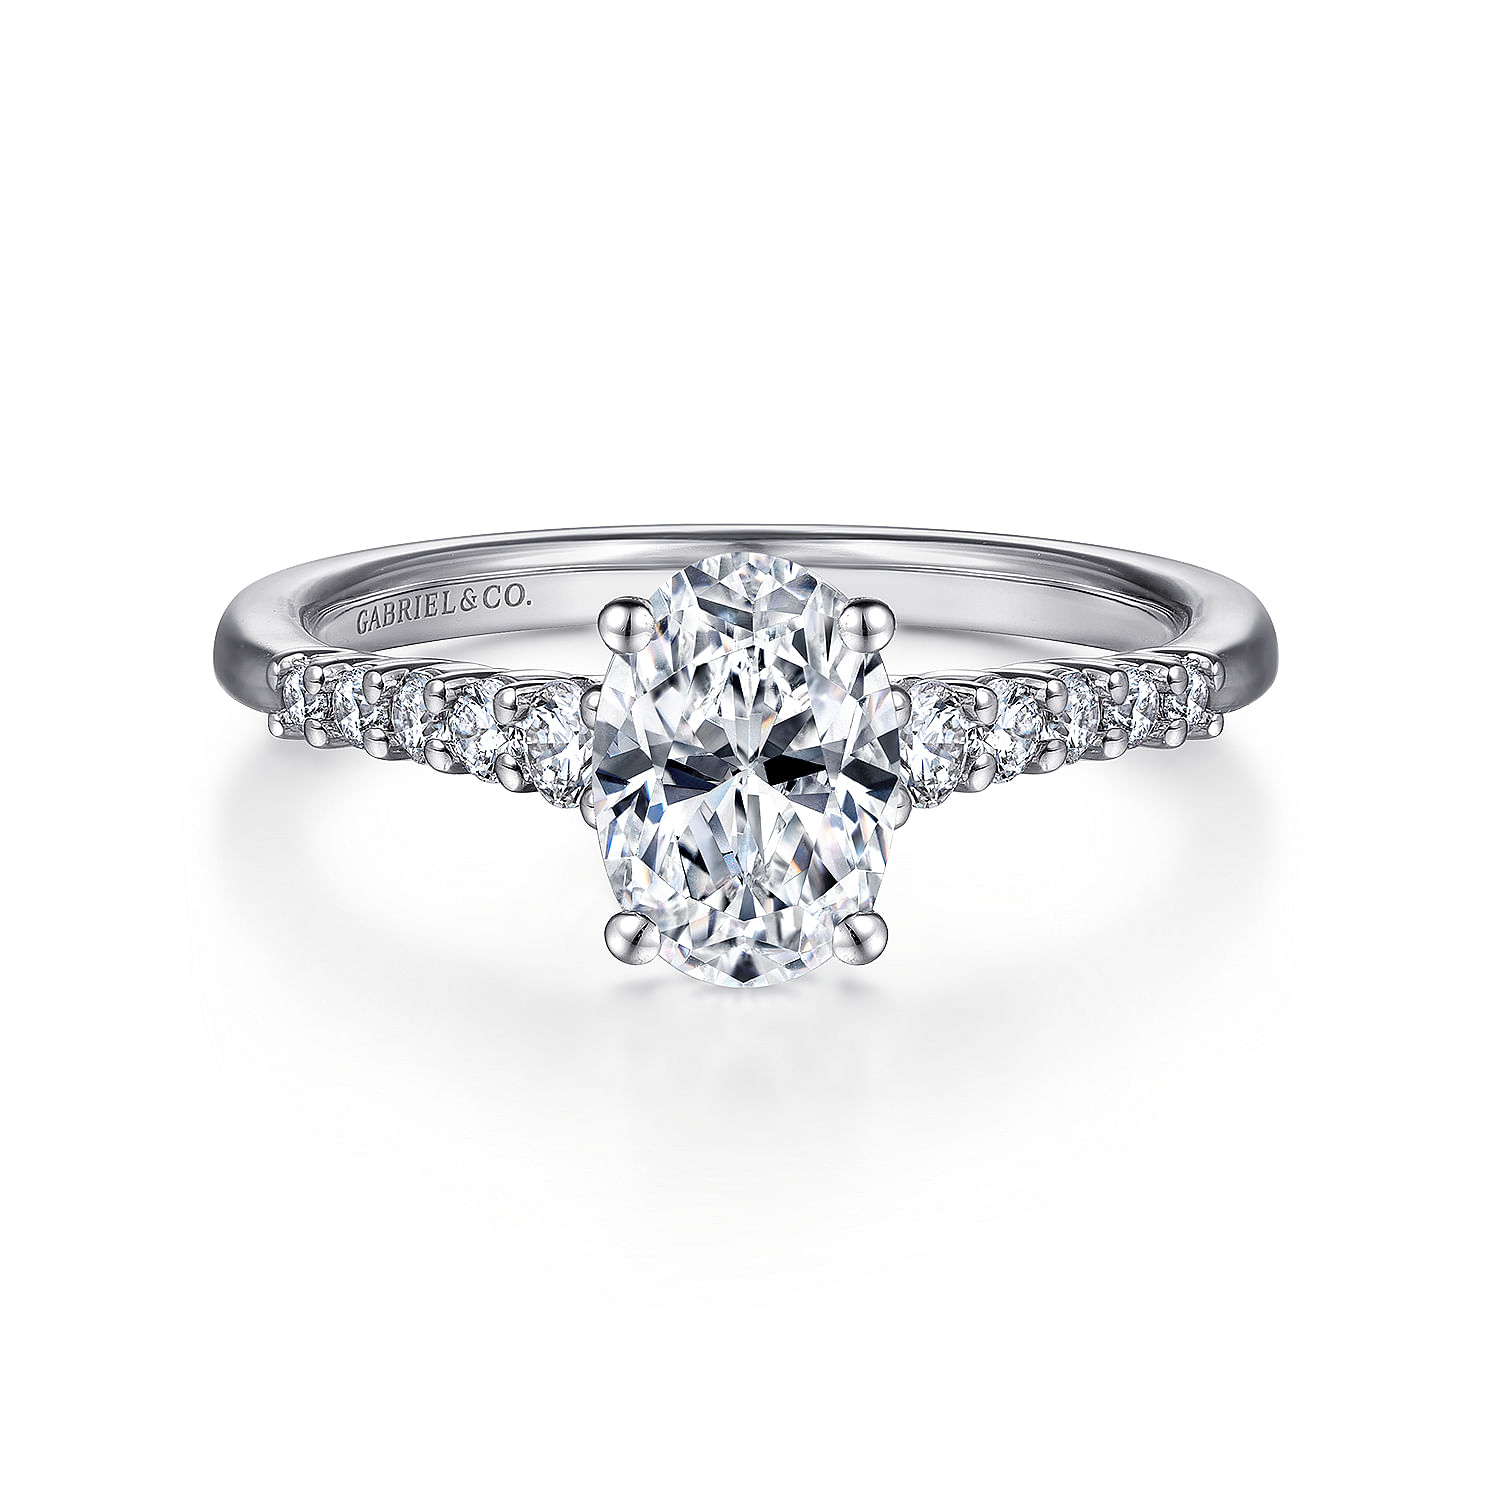 Reed---14K-White-Gold-Oval-Diamond-Engagement-Ring1